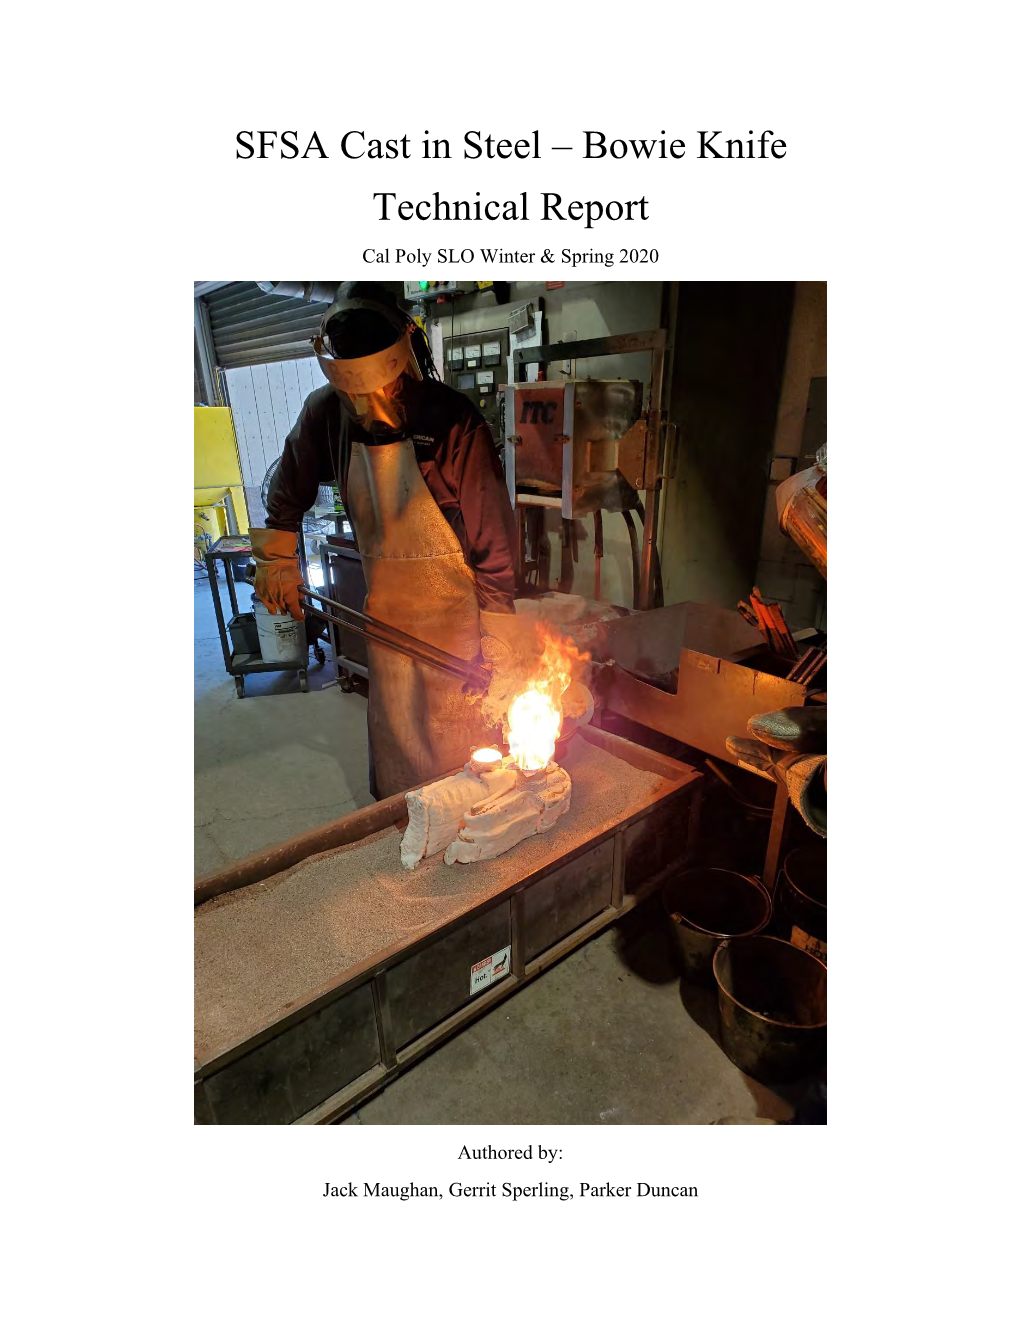 SFSA Cast in Steel – Bowie Knife Technical Report Cal Poly SLO Winter & Spring 2020